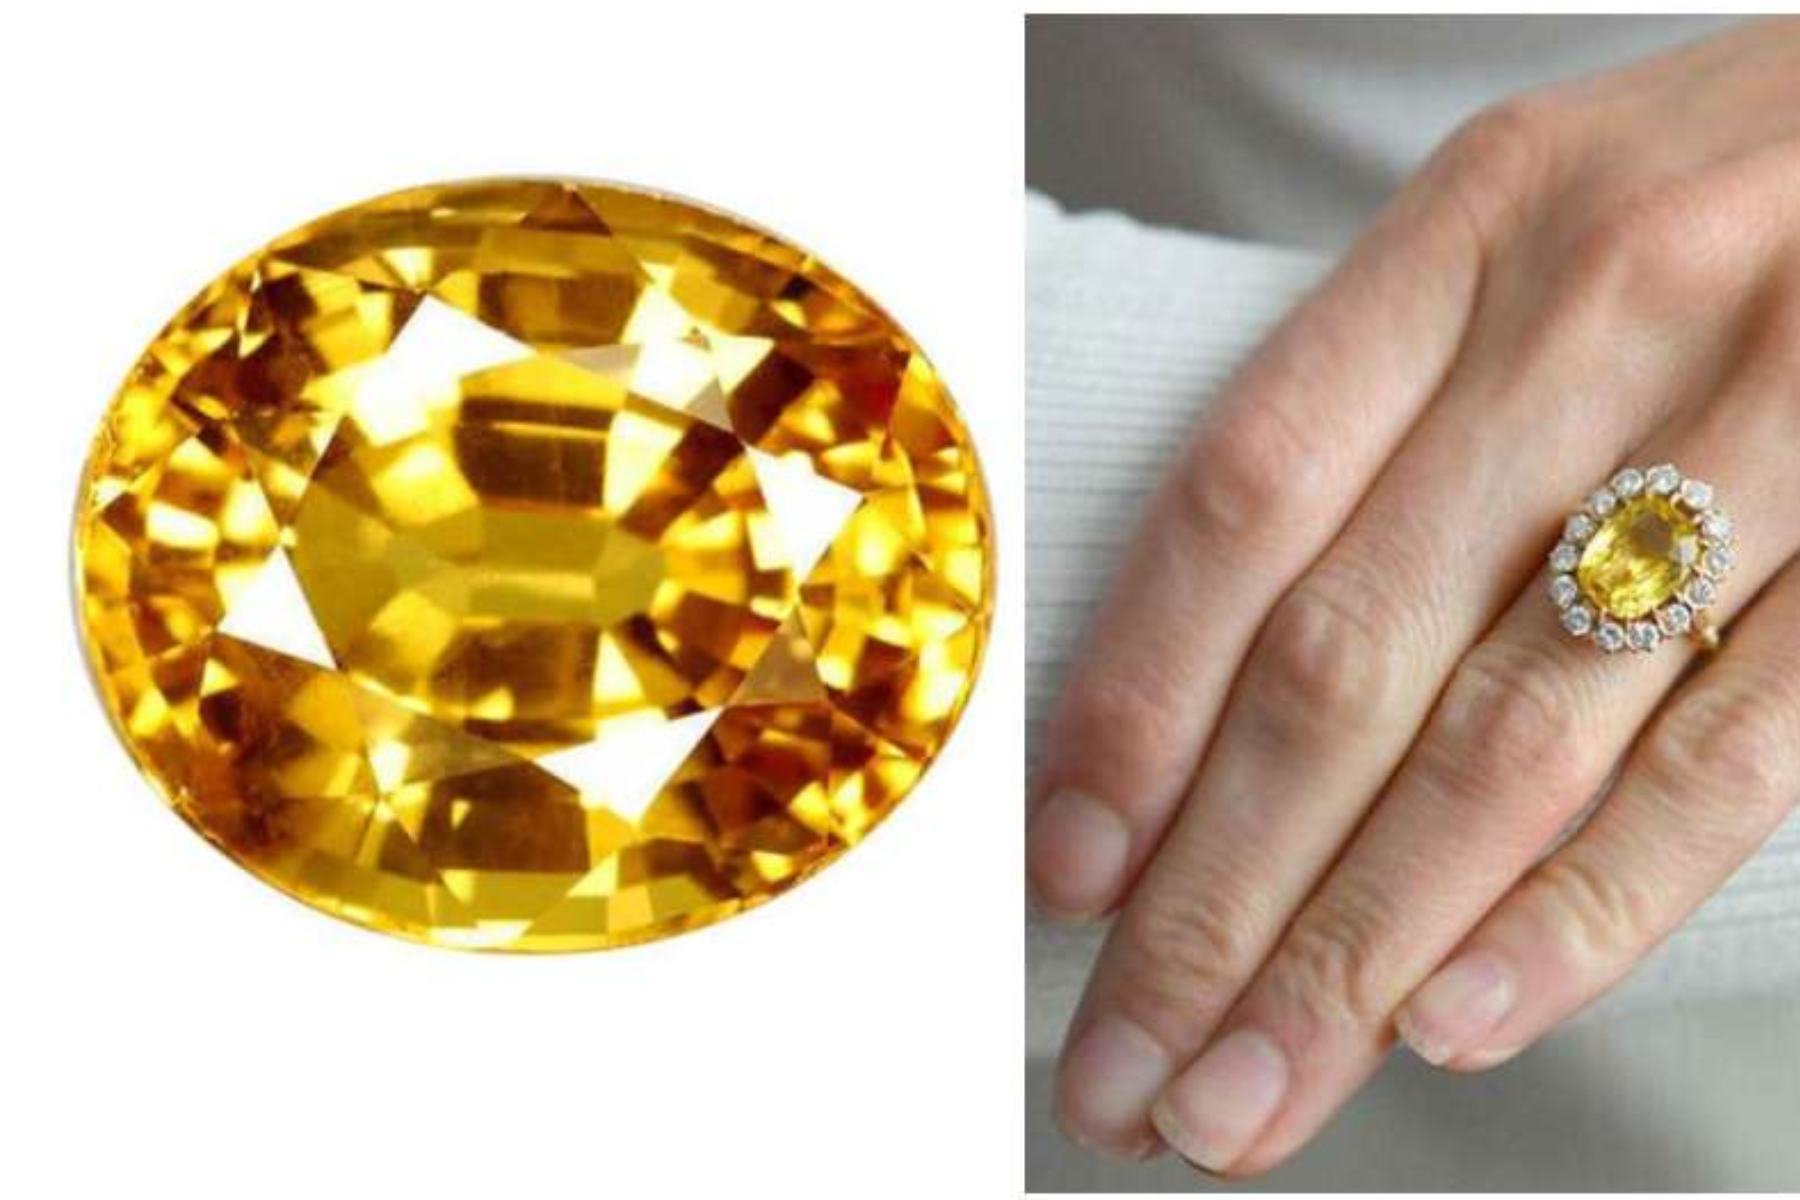 A Topaz stone on the right and a on the left part, a hand of a woman wearing a topaz ring on her ring finger